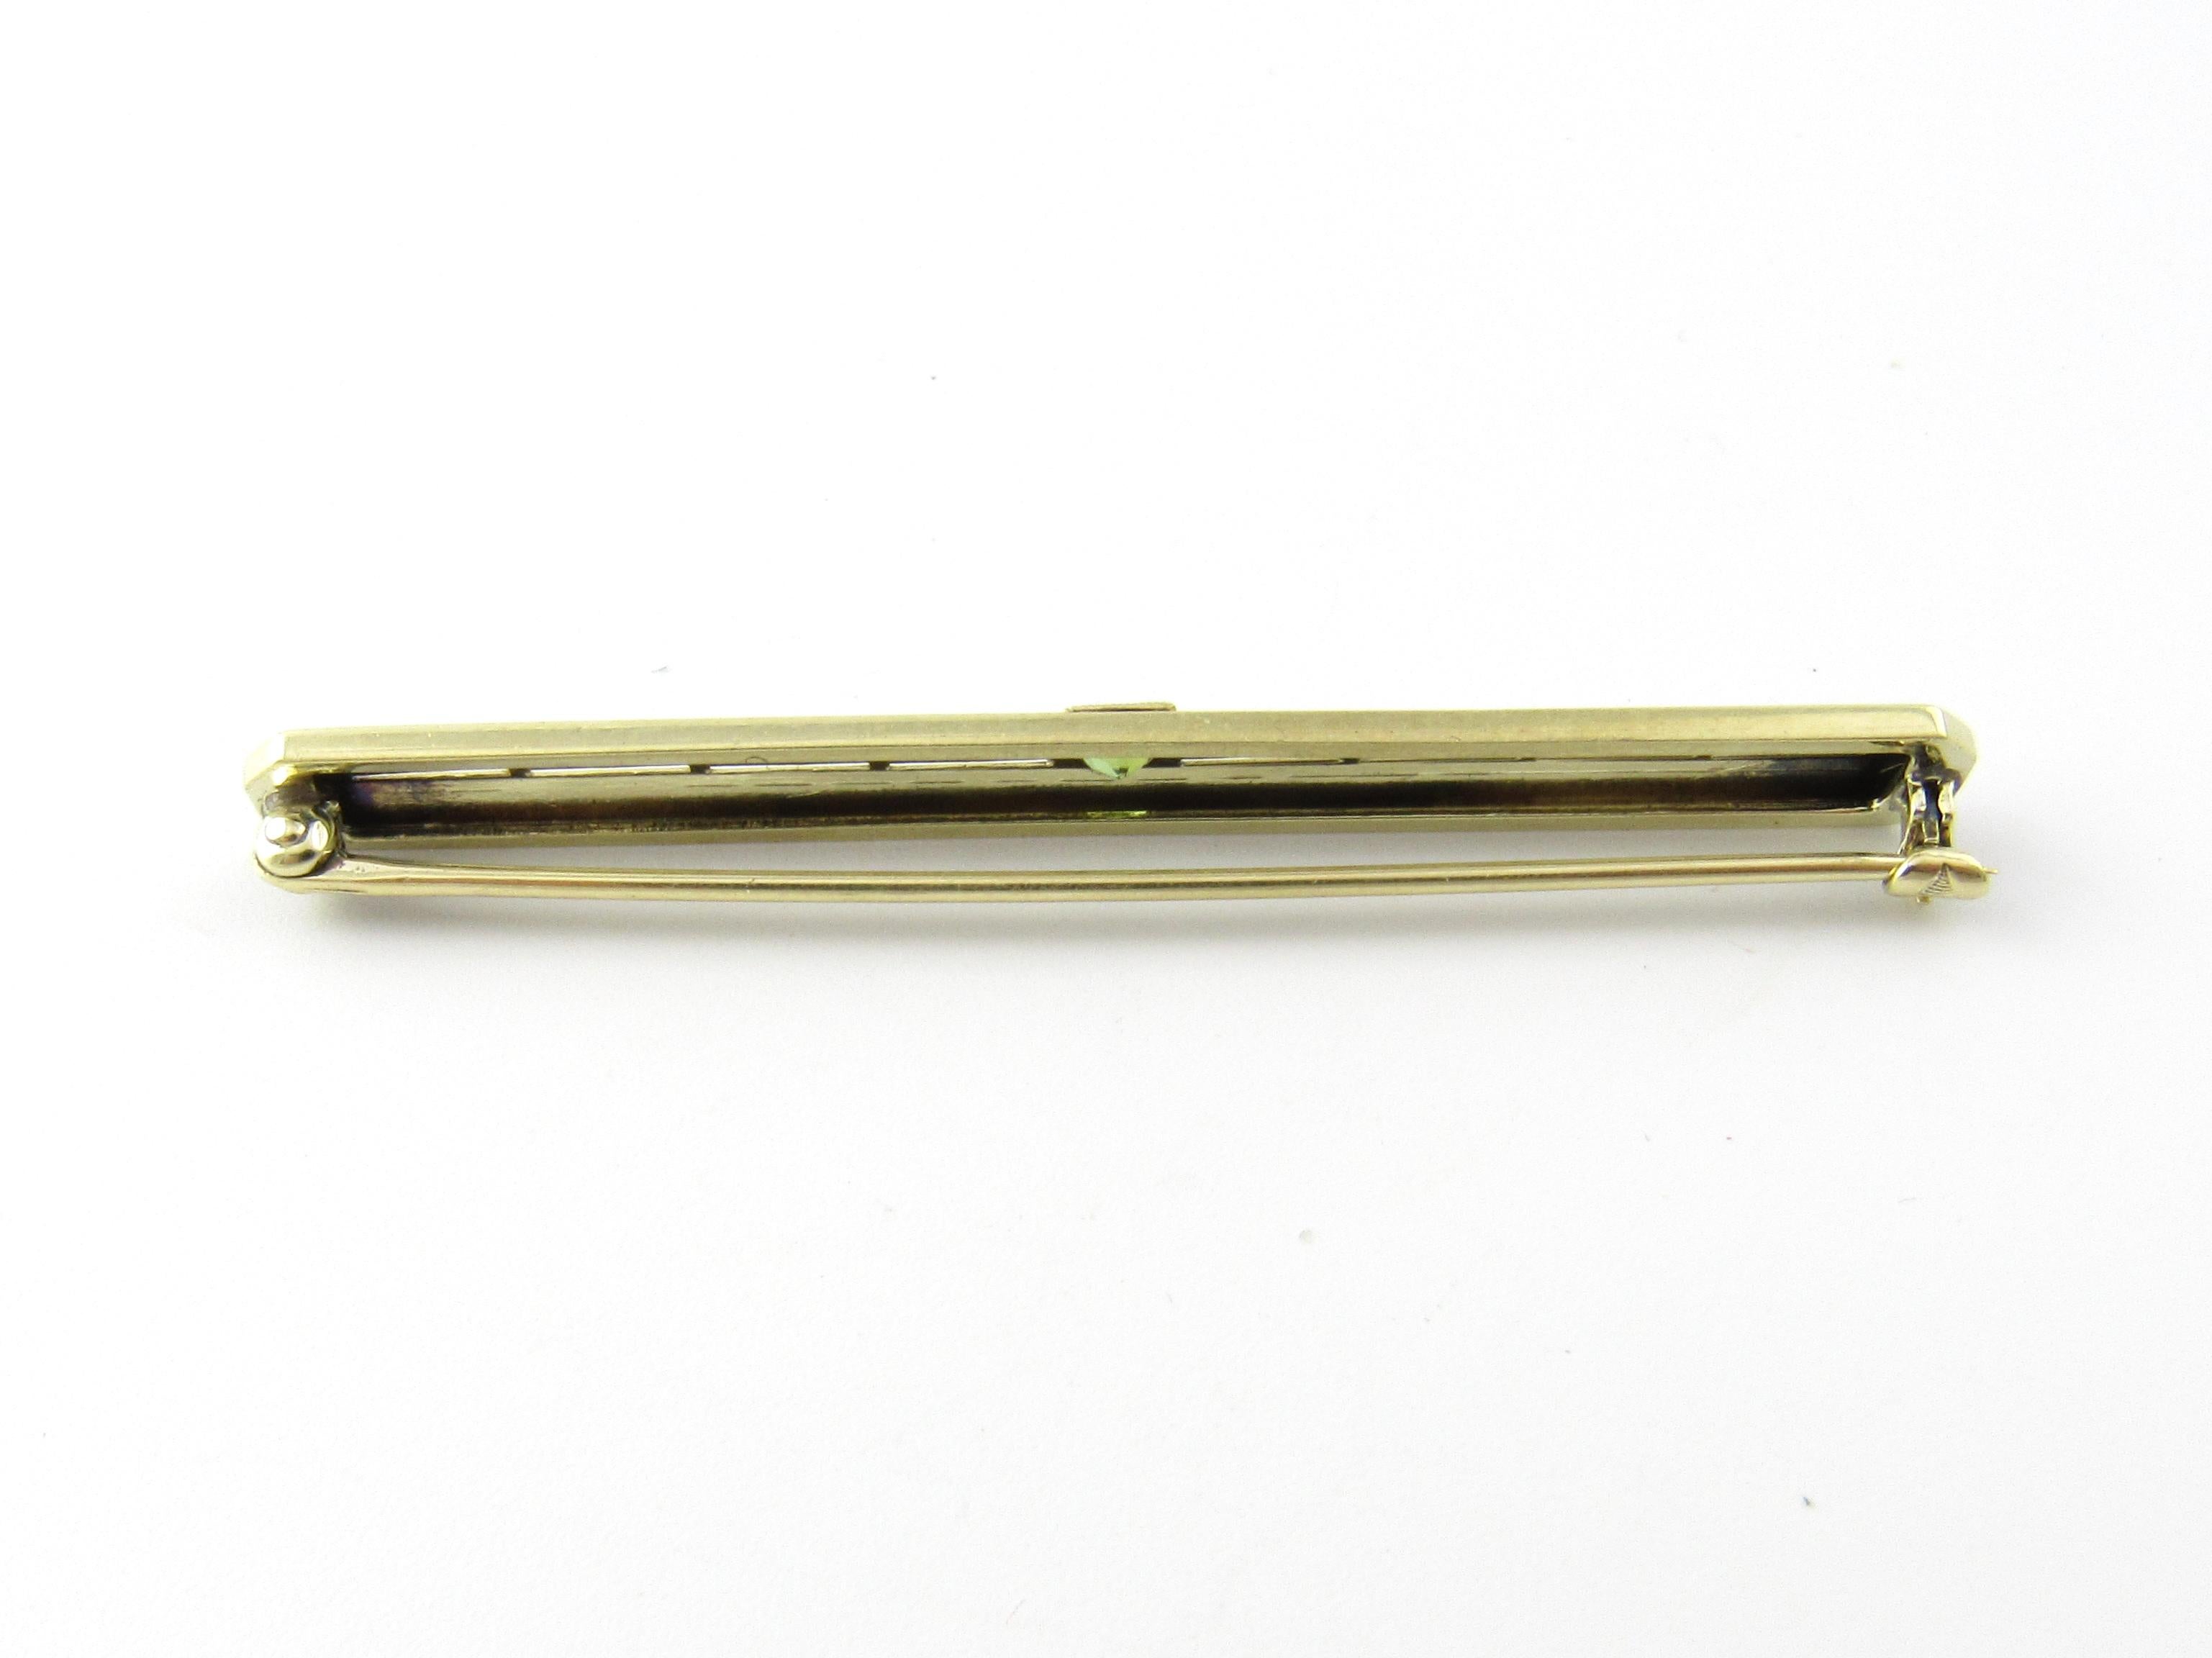 Vintage 14 Karat Yellow Gold and Peridot Bar Pin/Brooch

This elegant bar pin features one round peridot (3 mm) set in beautifully detailed 14K yellow gold.

Size: 57 mm x 6 mm

Weight: 1.8 dwt. / 2.9 gr.

Stamped: 14K

Very good condition,